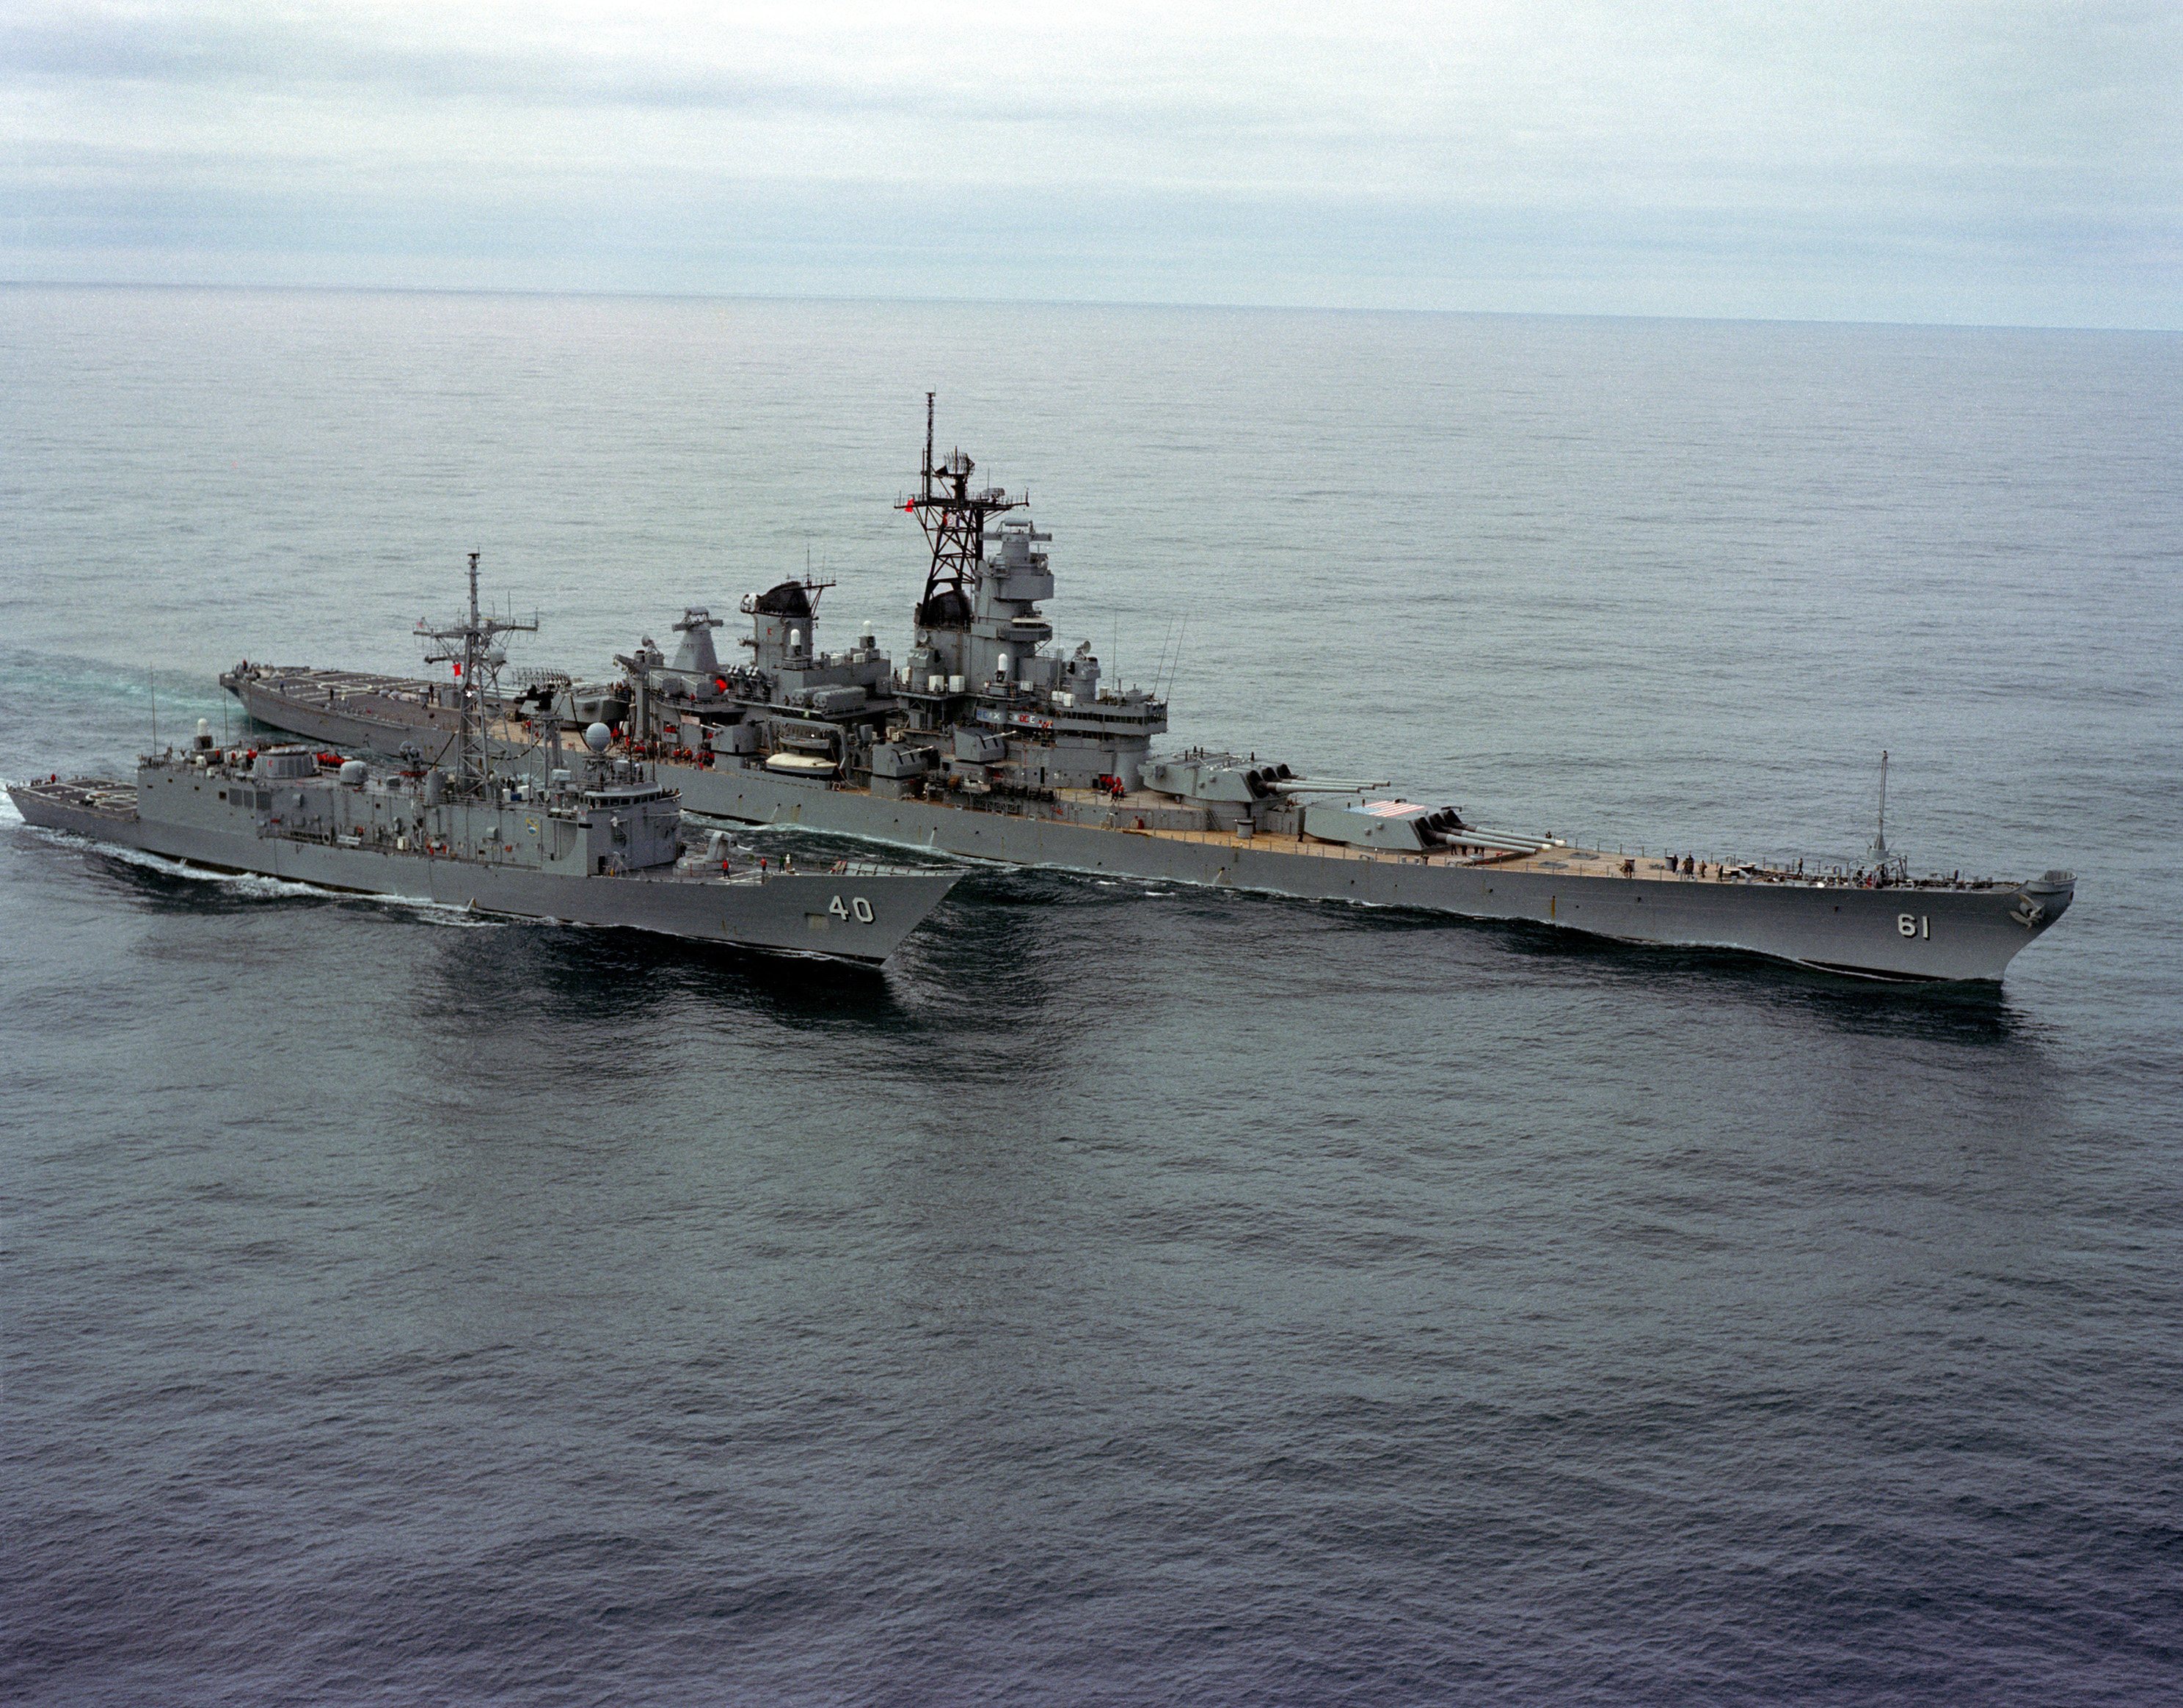 Guided missile frigate USS Halyburton receiving fuel from battleship USS Iowa in the North Atlantic, 6 Sep 1985, photo 3 of 5